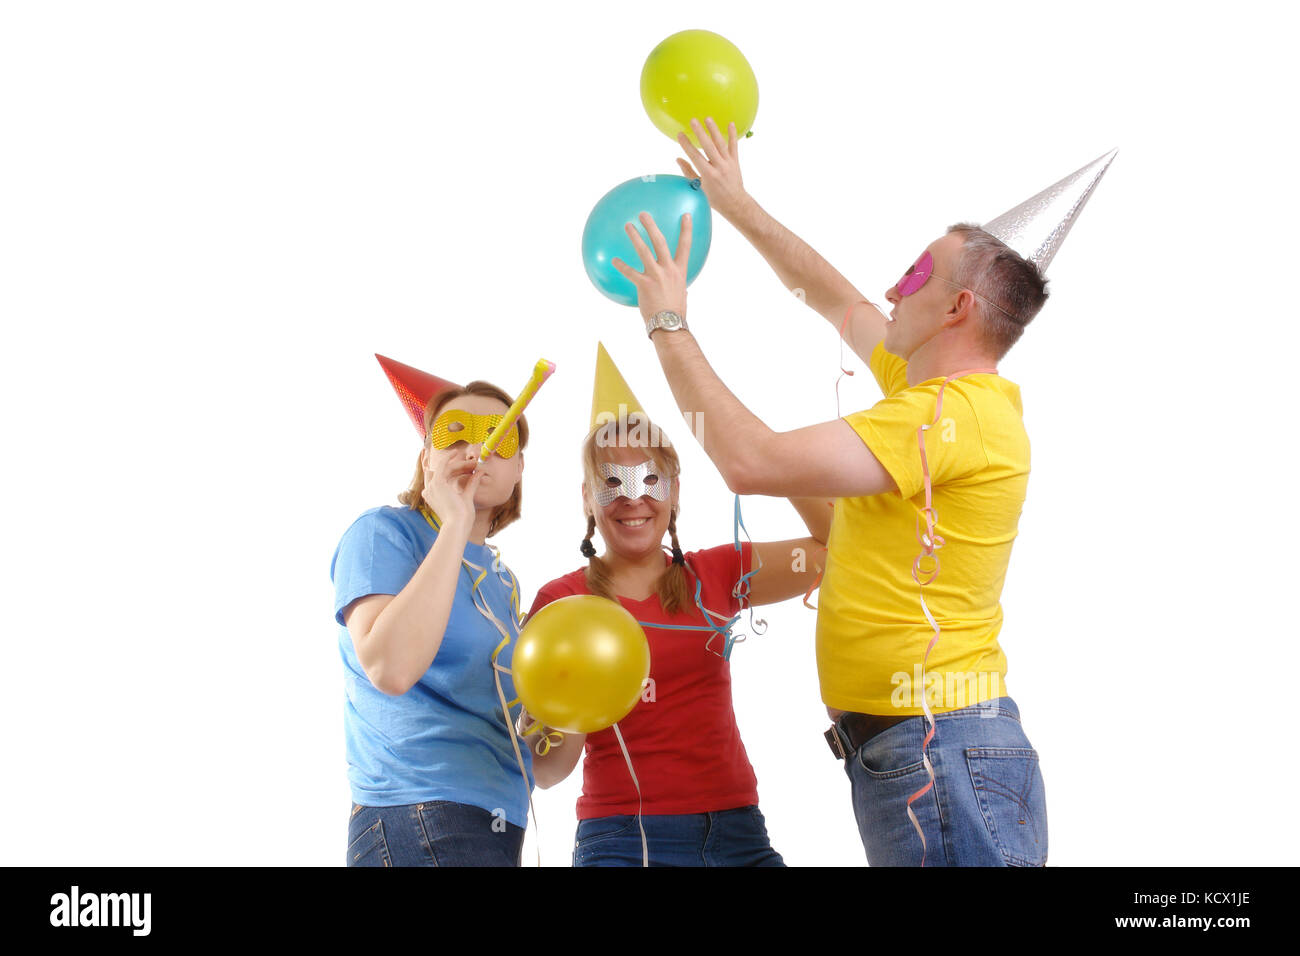 Group of friends wearing party masks and hats having fun over white Stock Photo